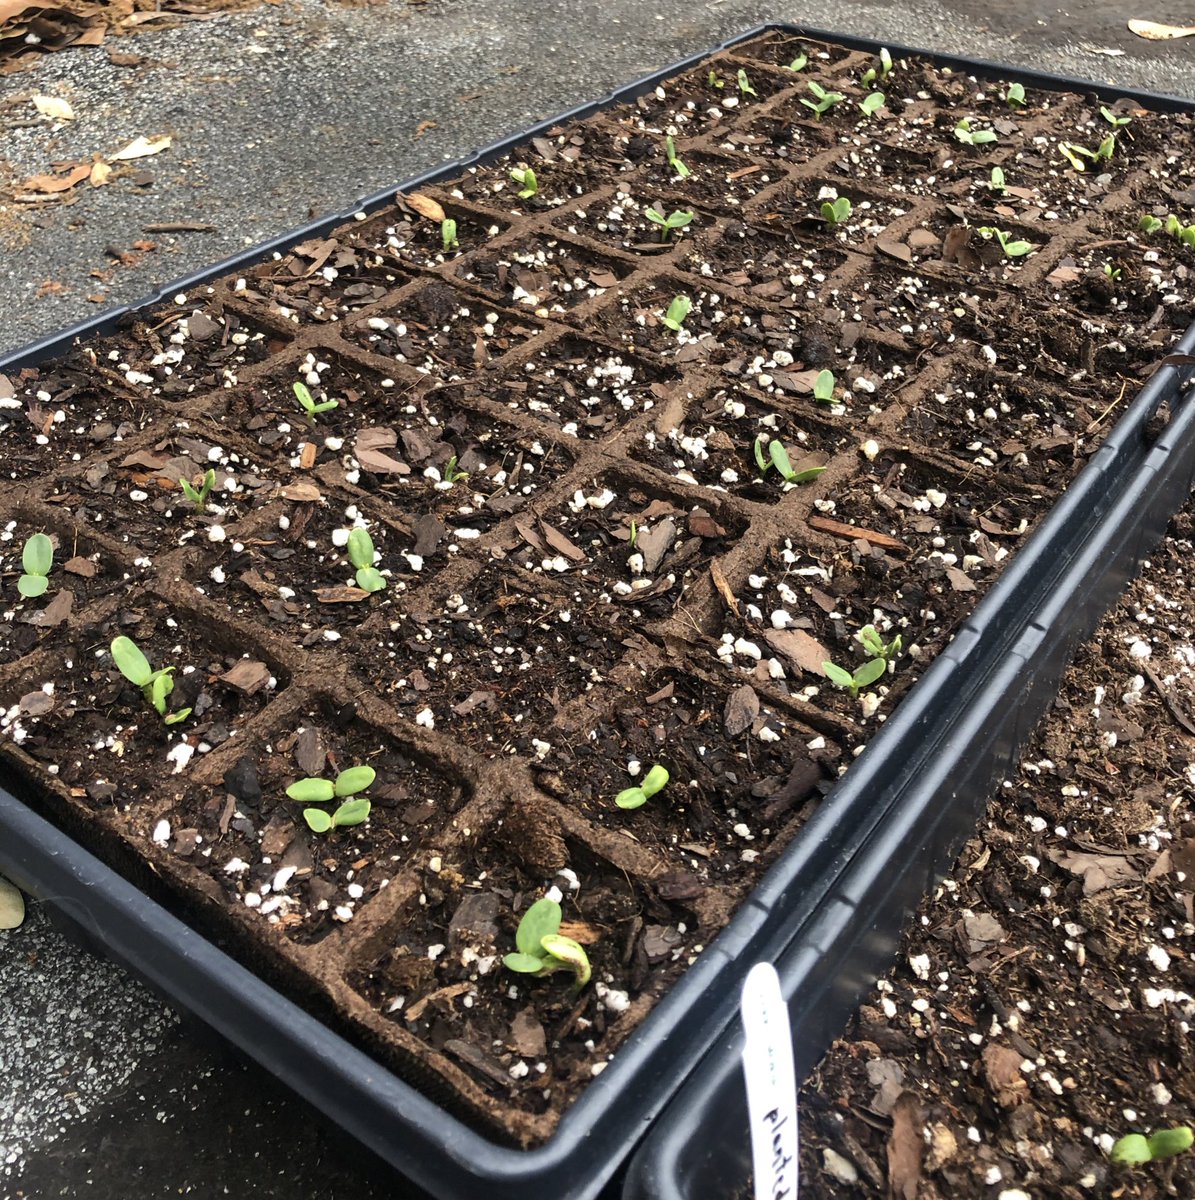 And suddenly, I have 63 sunflower seedlings. Send help.